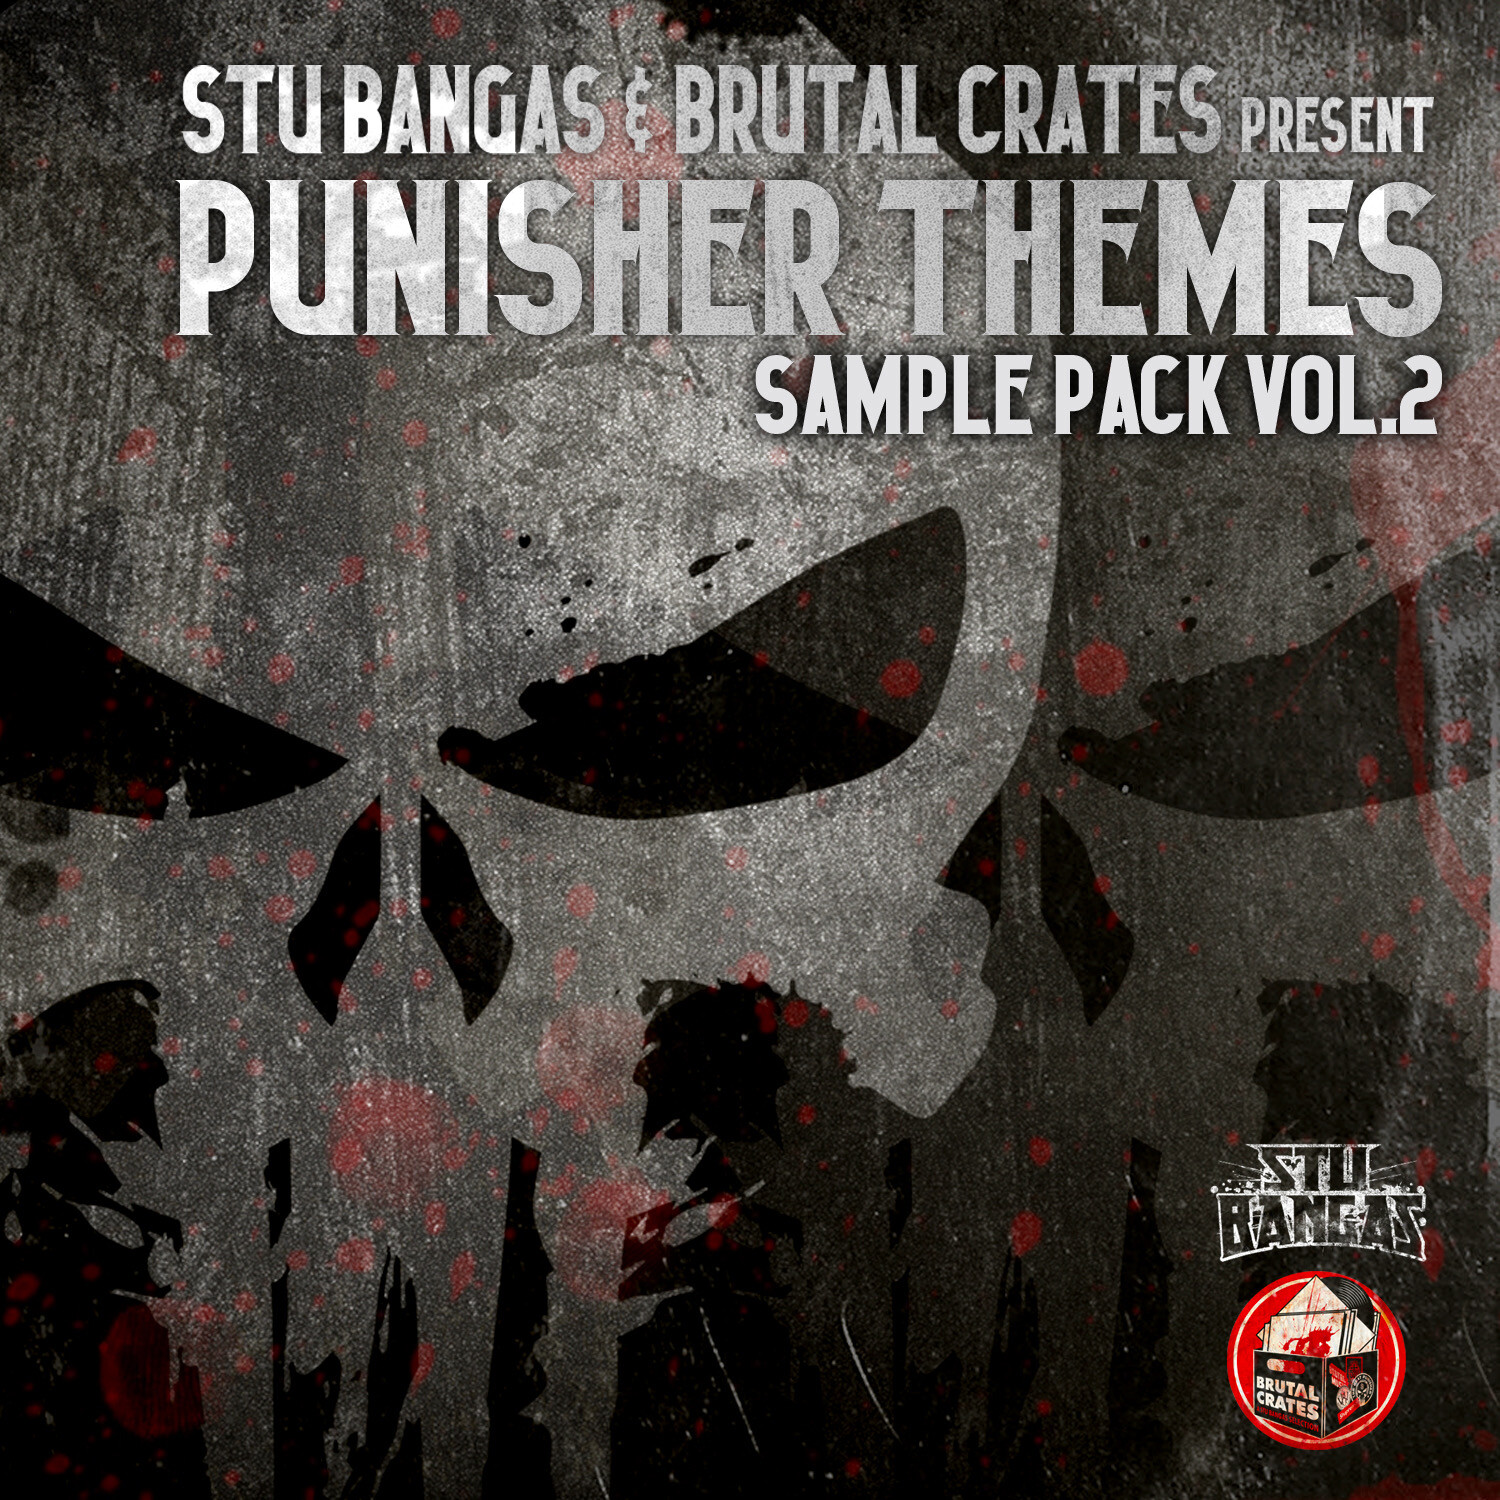 BRUTAL CRATES "PUNISHER THEME MUSIC VOL. 2 SAMPLE PACK (COMPOSITIONS)